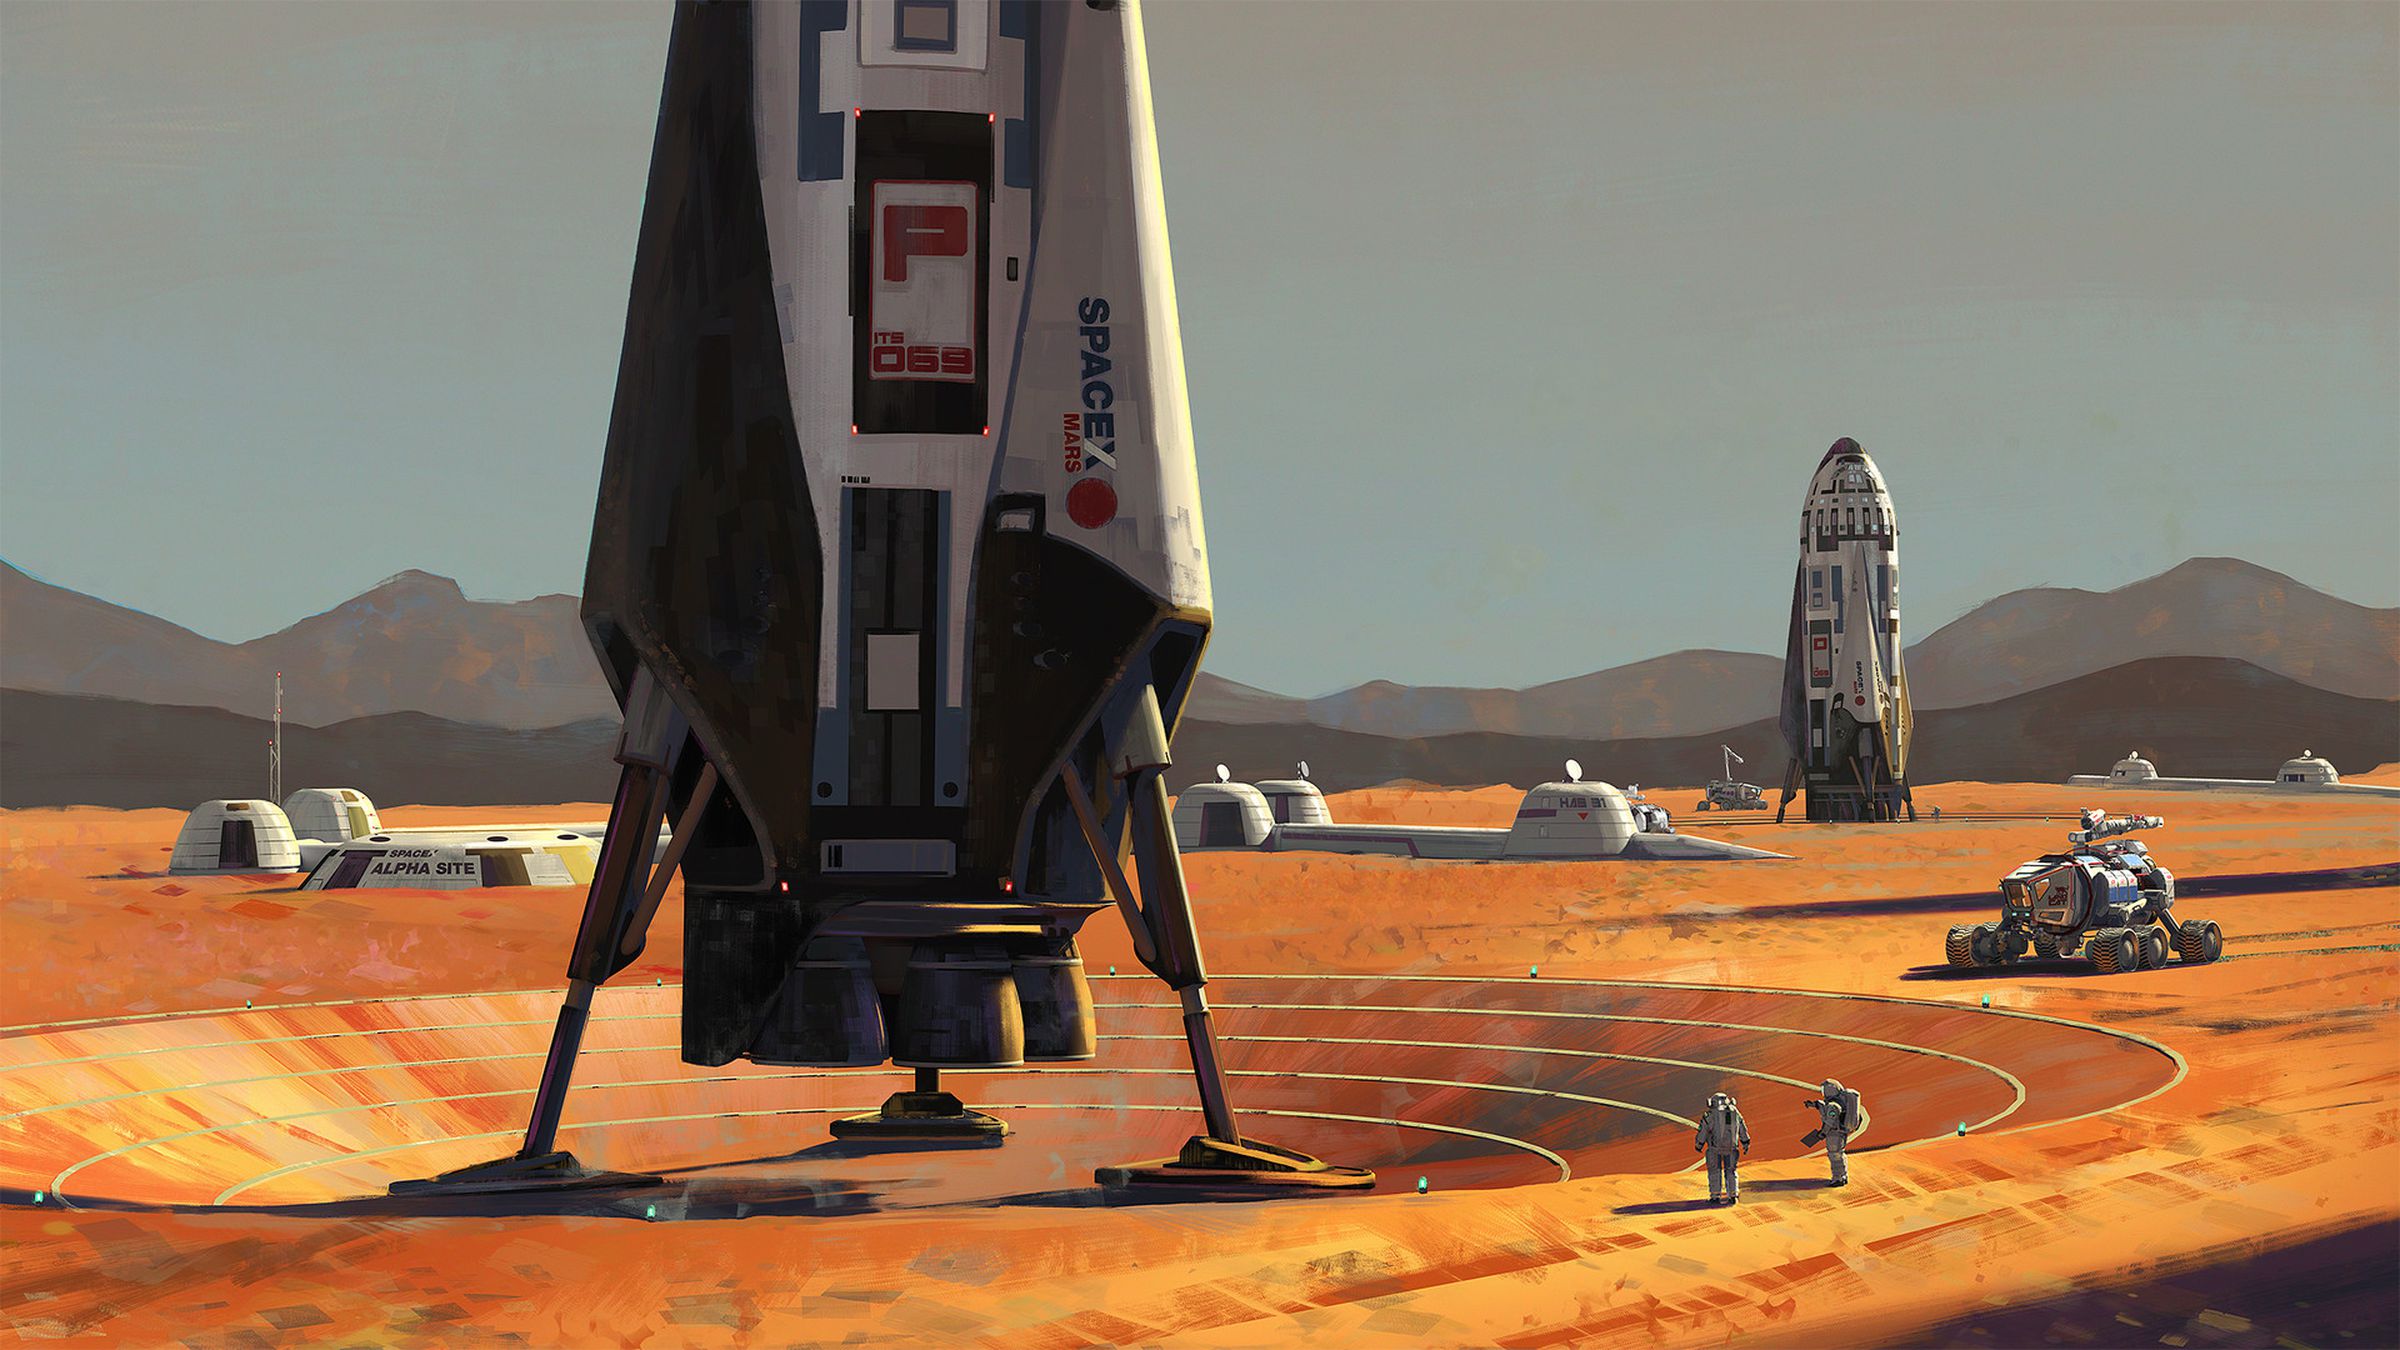 SpaceX’s ITS landers at Alpha Site, first large scale human colony on Mars.